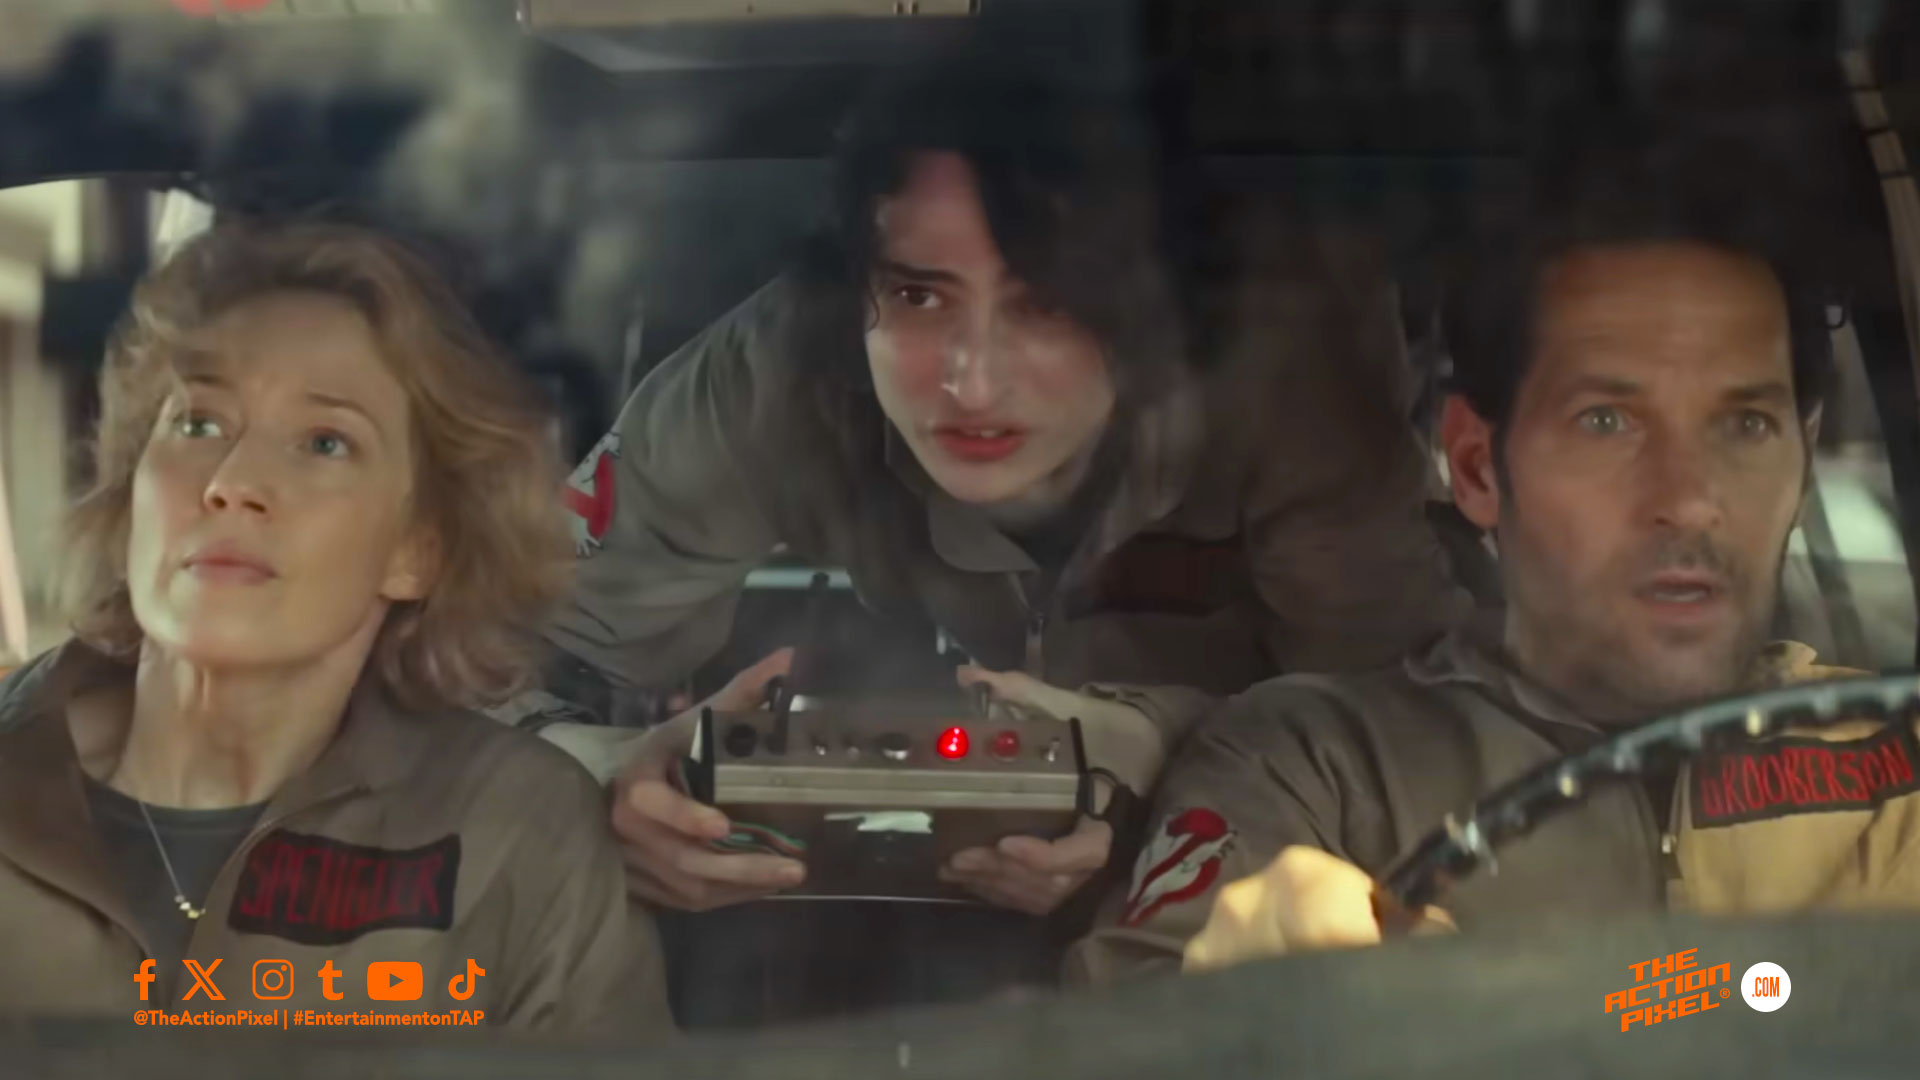 ghostbusters: frozen empire, sony pictures, ghostbusters frozen empire, ghostbusters , ghostbusters: frozen empire trailer, entertainment on tap, the action pixel, featured,